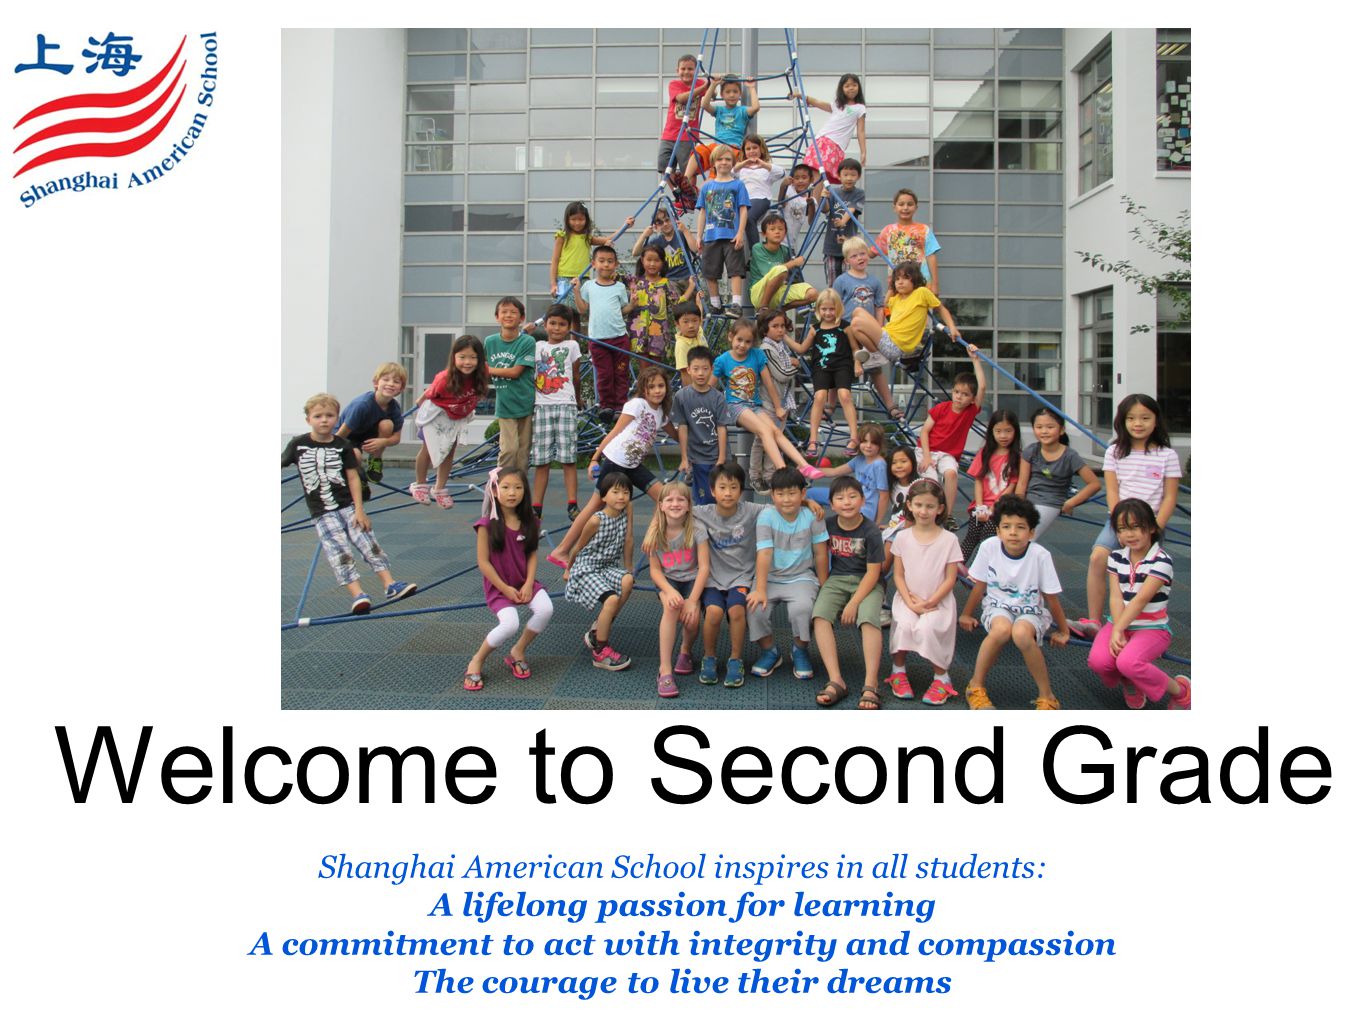 Welcome to Second Grade Shanghai American School inspires in all students: A lifelong passion for learning A commitment to act with integrity and compassion The courage to live their dreams